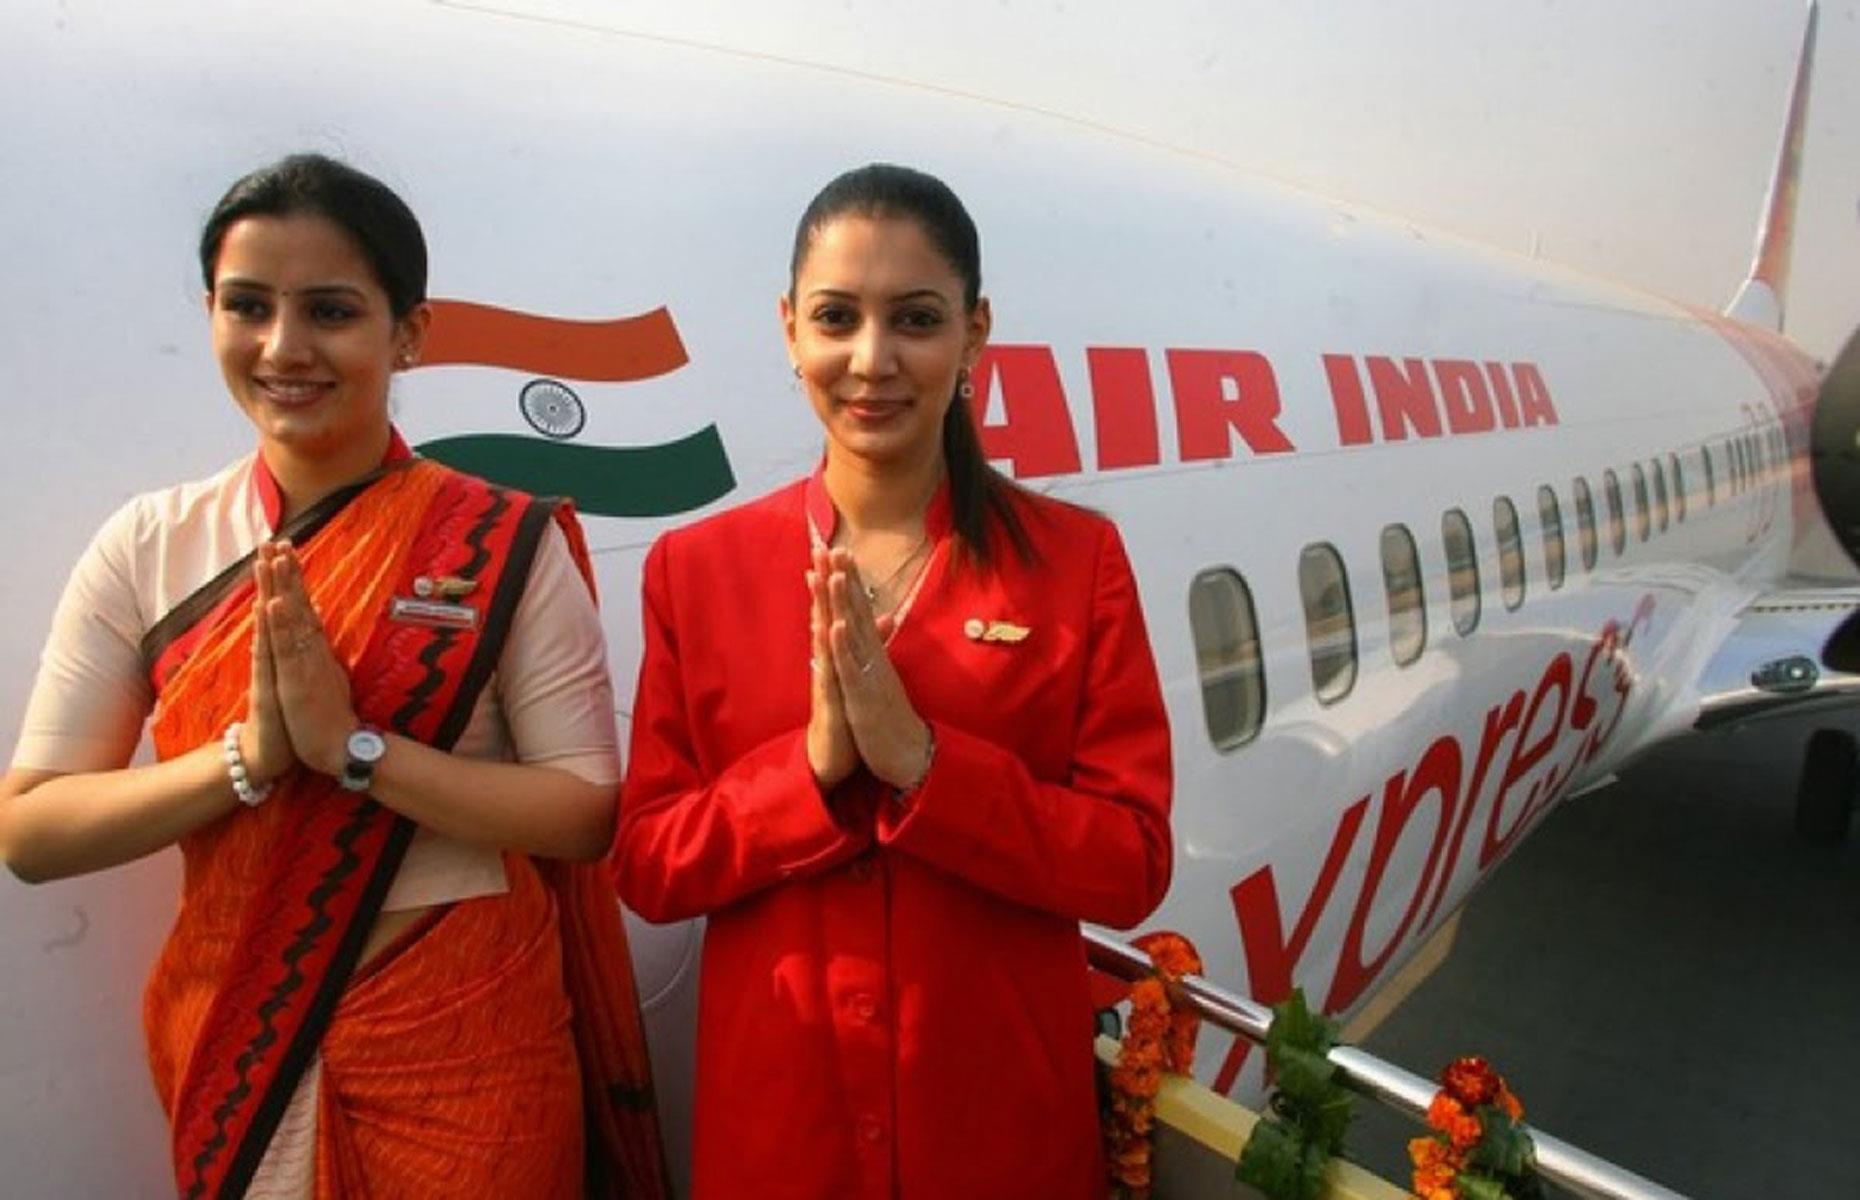 Lowest-paying country for flight attendants: India – $6,300 (£4.8k) average salary